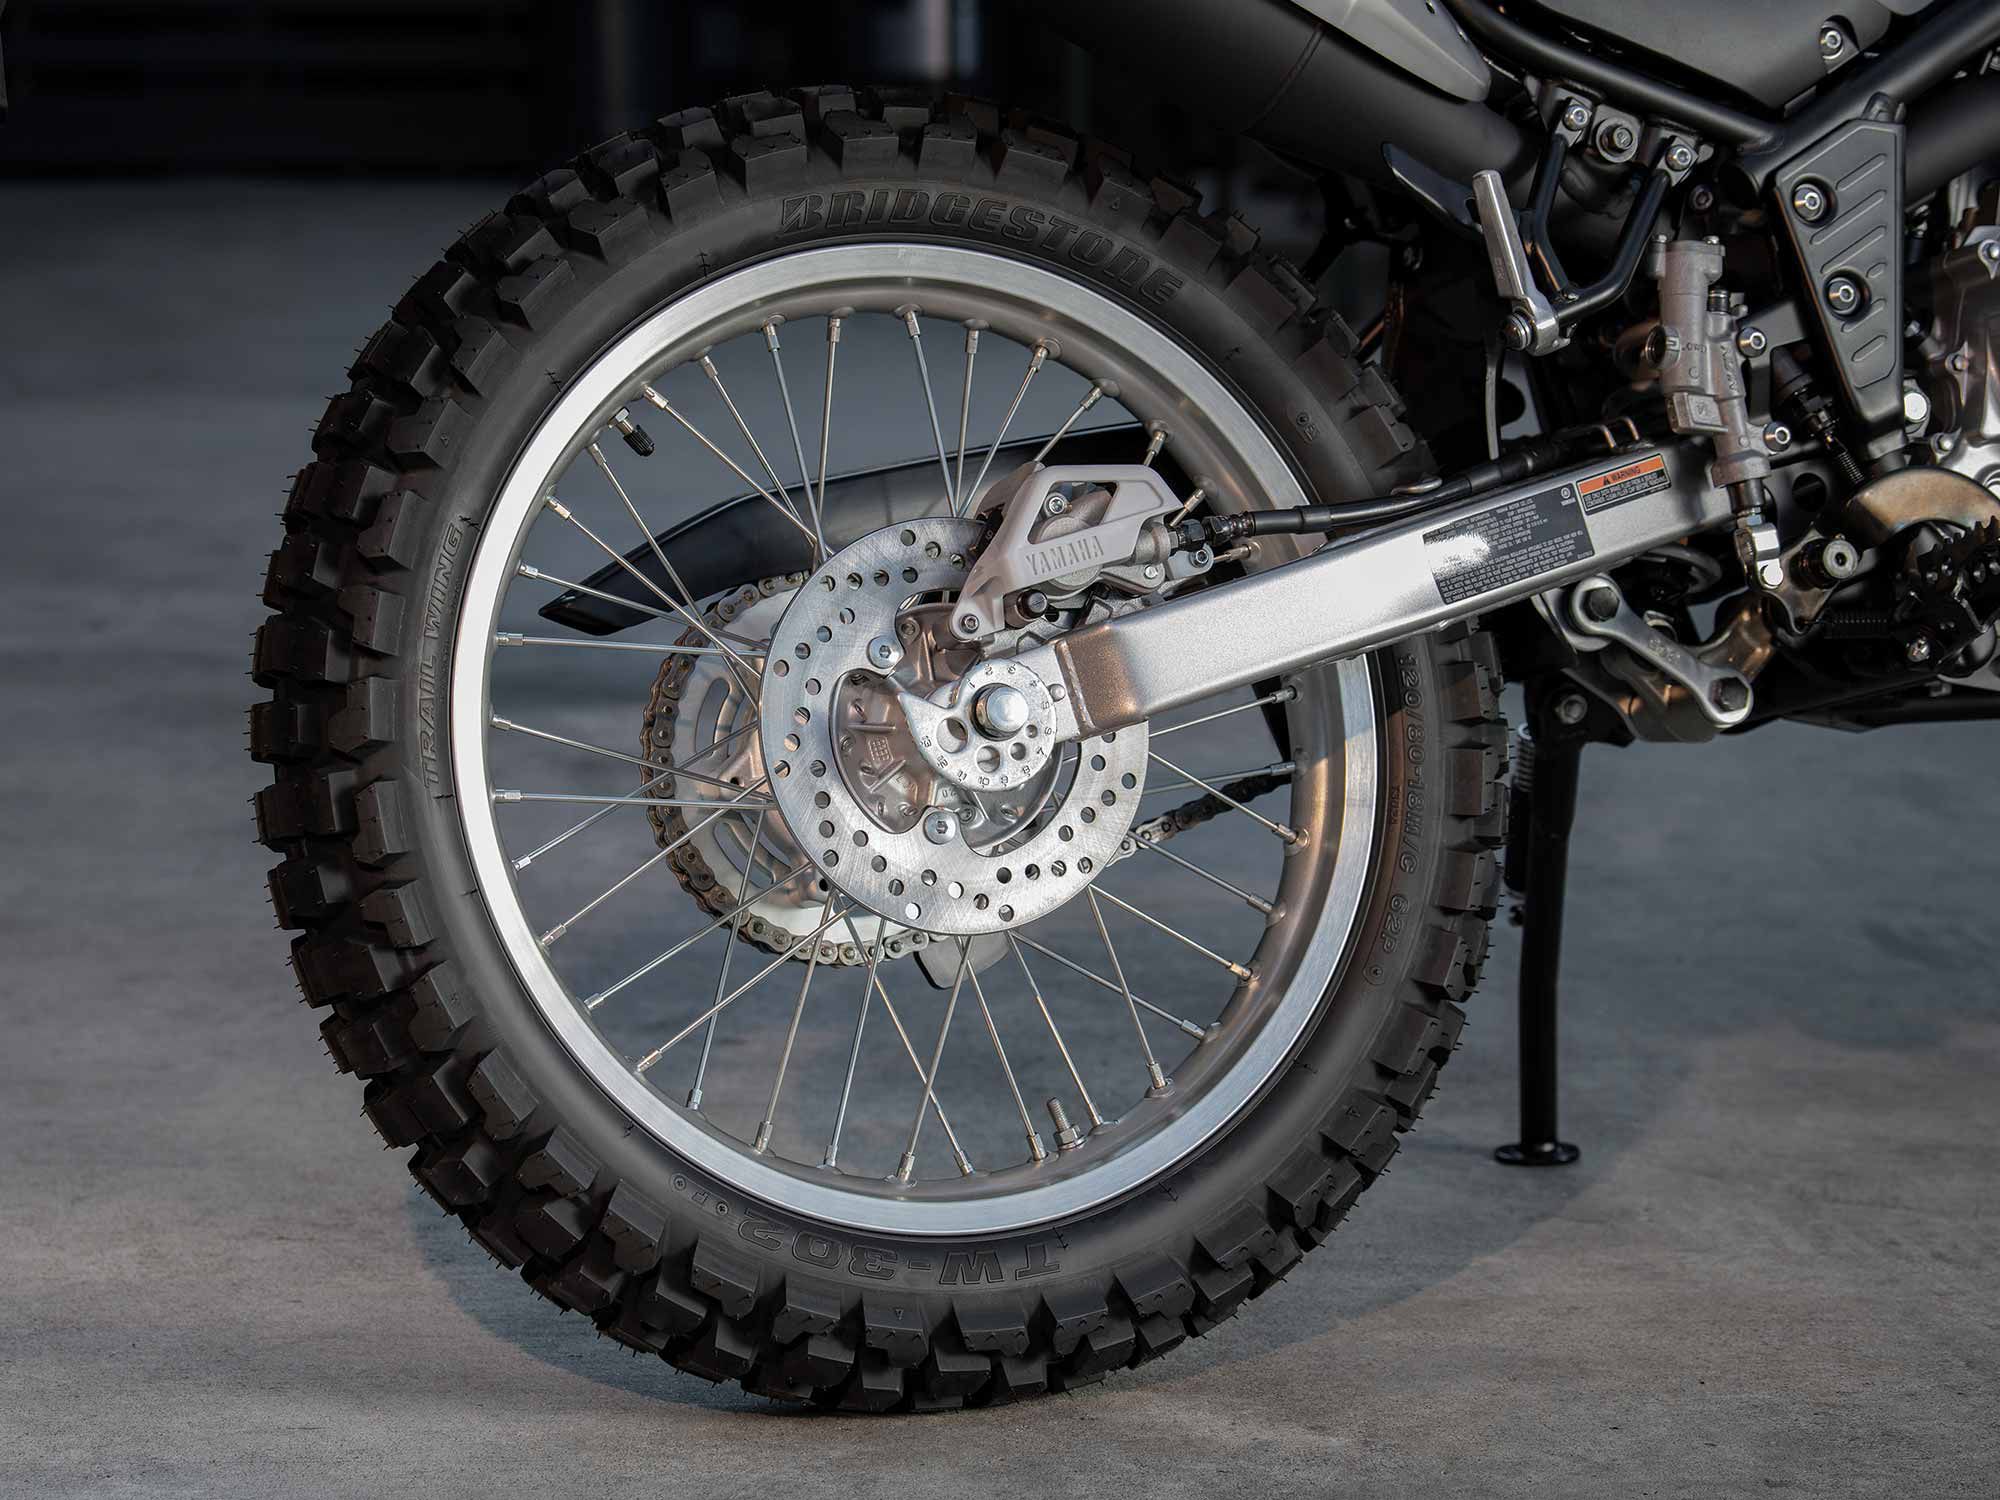 Spoked rims, knobby tires, and long suspension travel, the makings of a trail-ready machine.